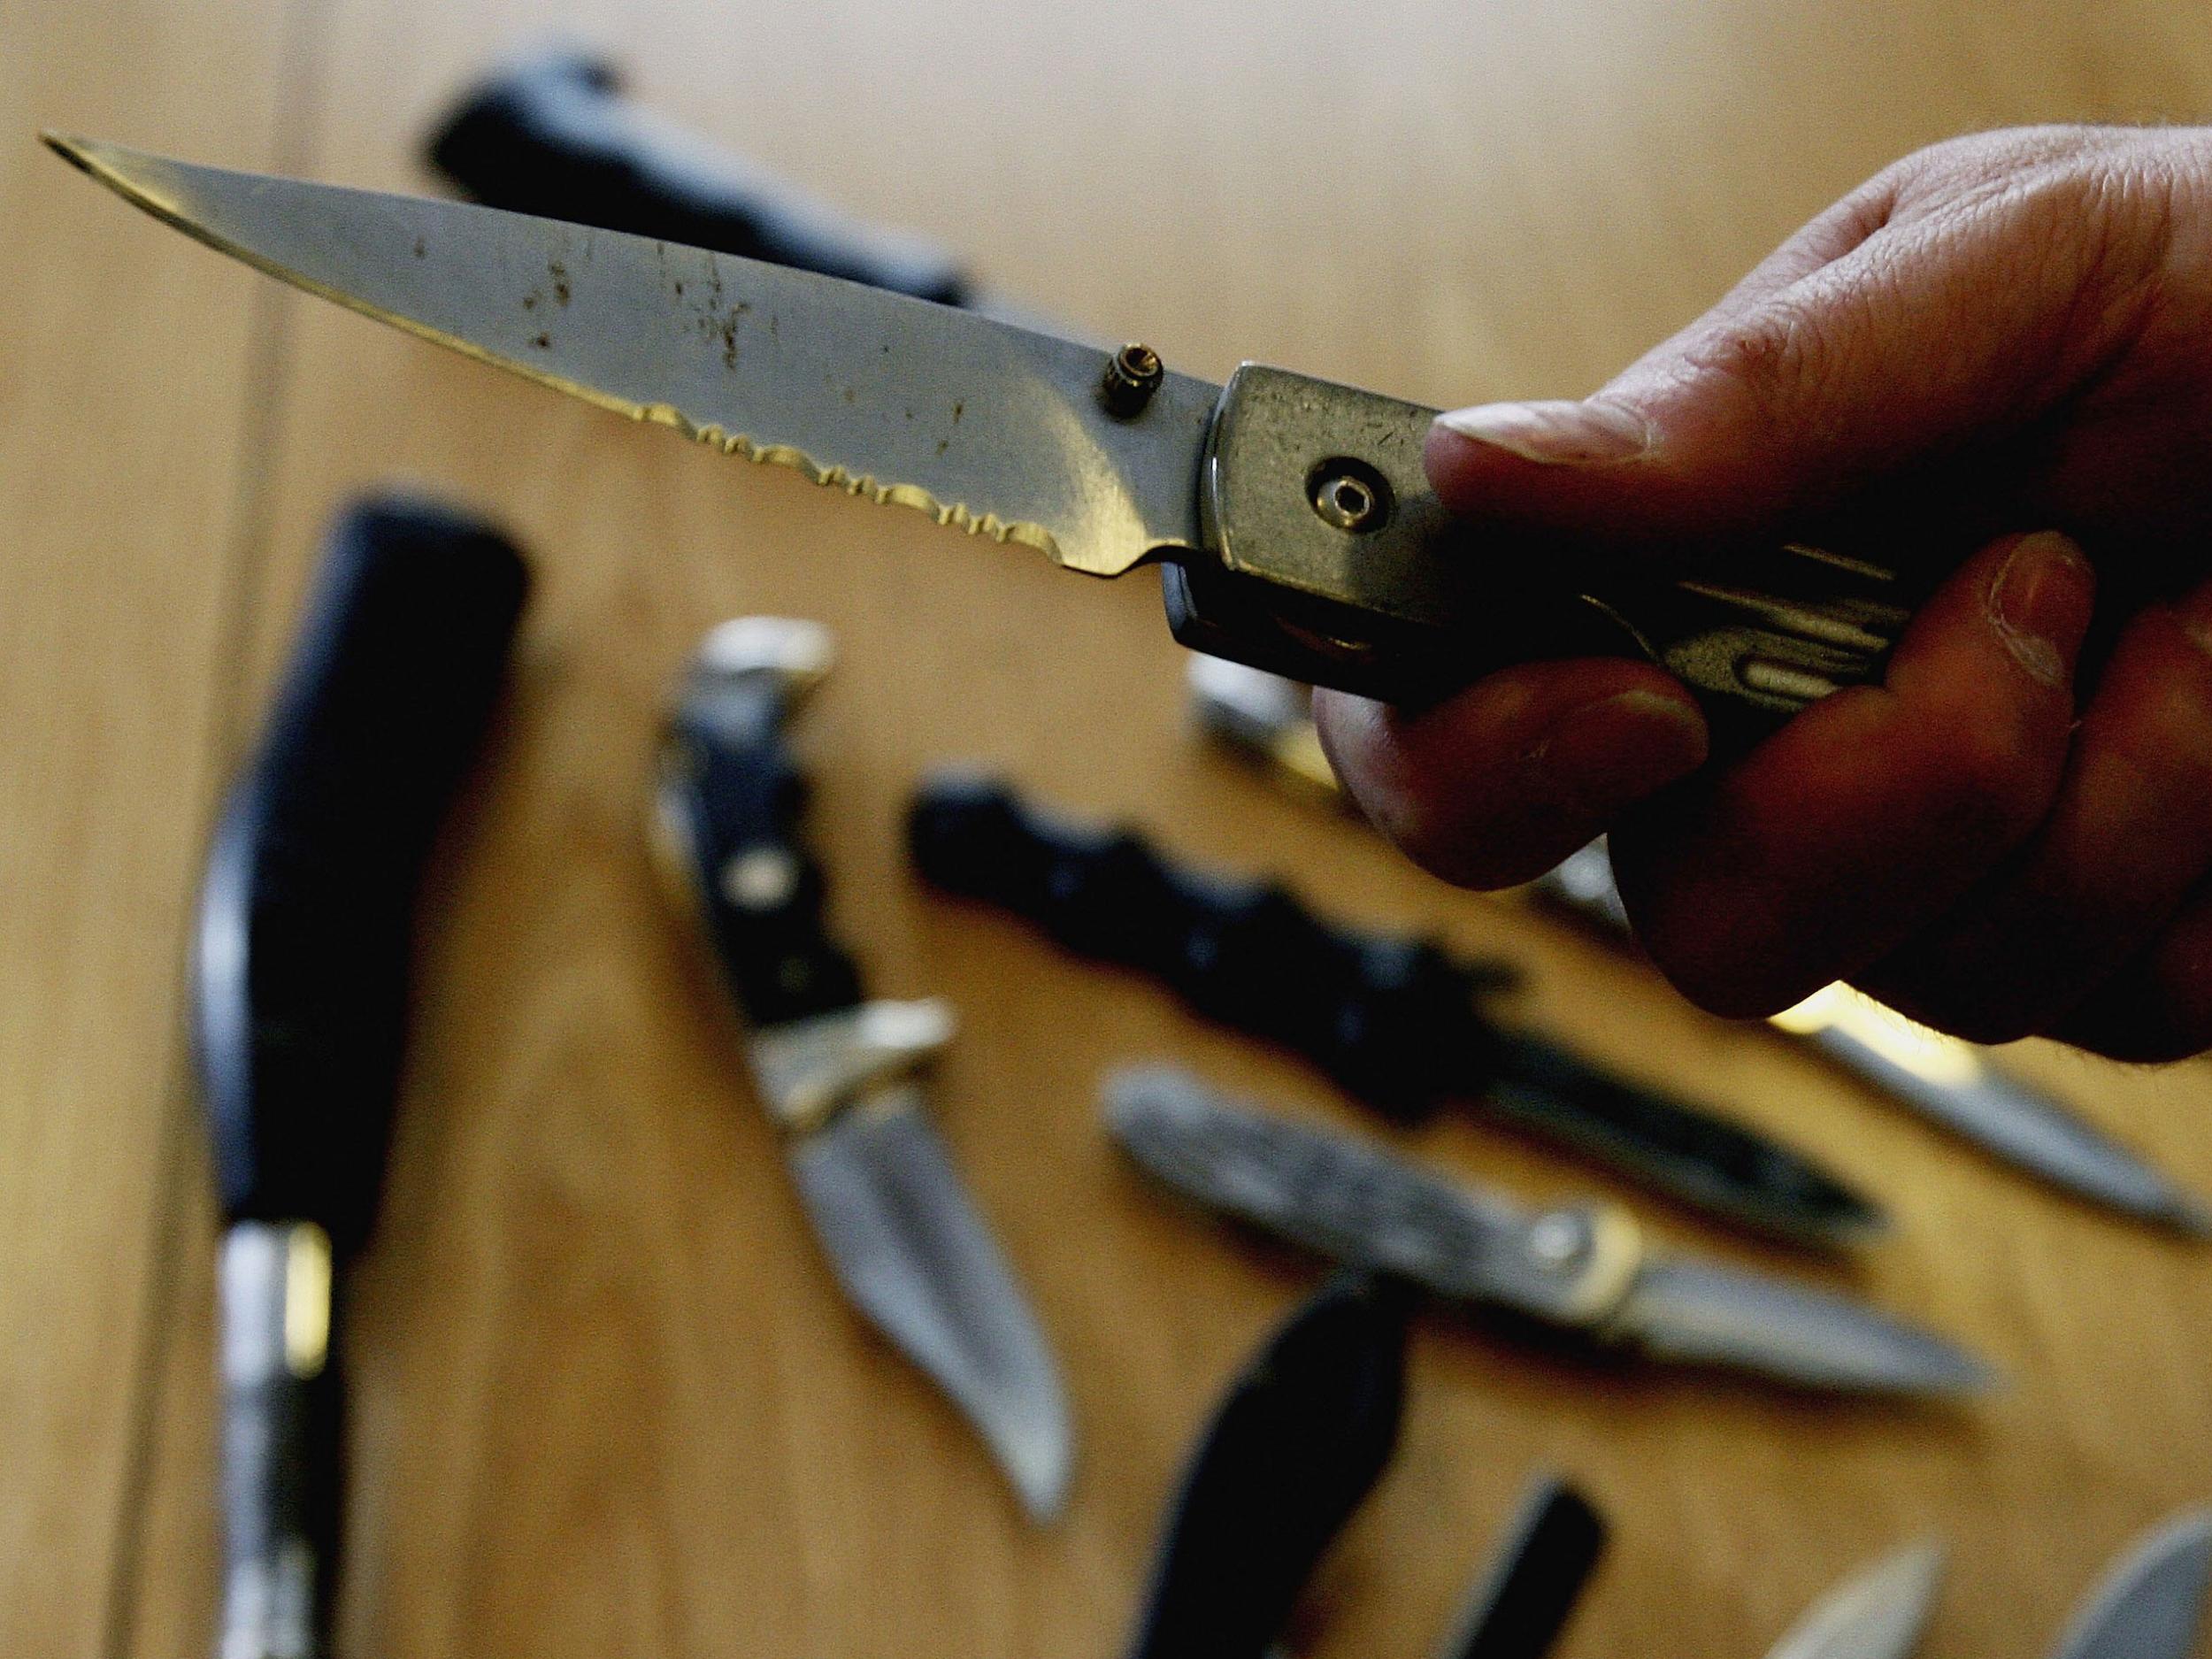 Knife crime hit record levels in England and Wales last year